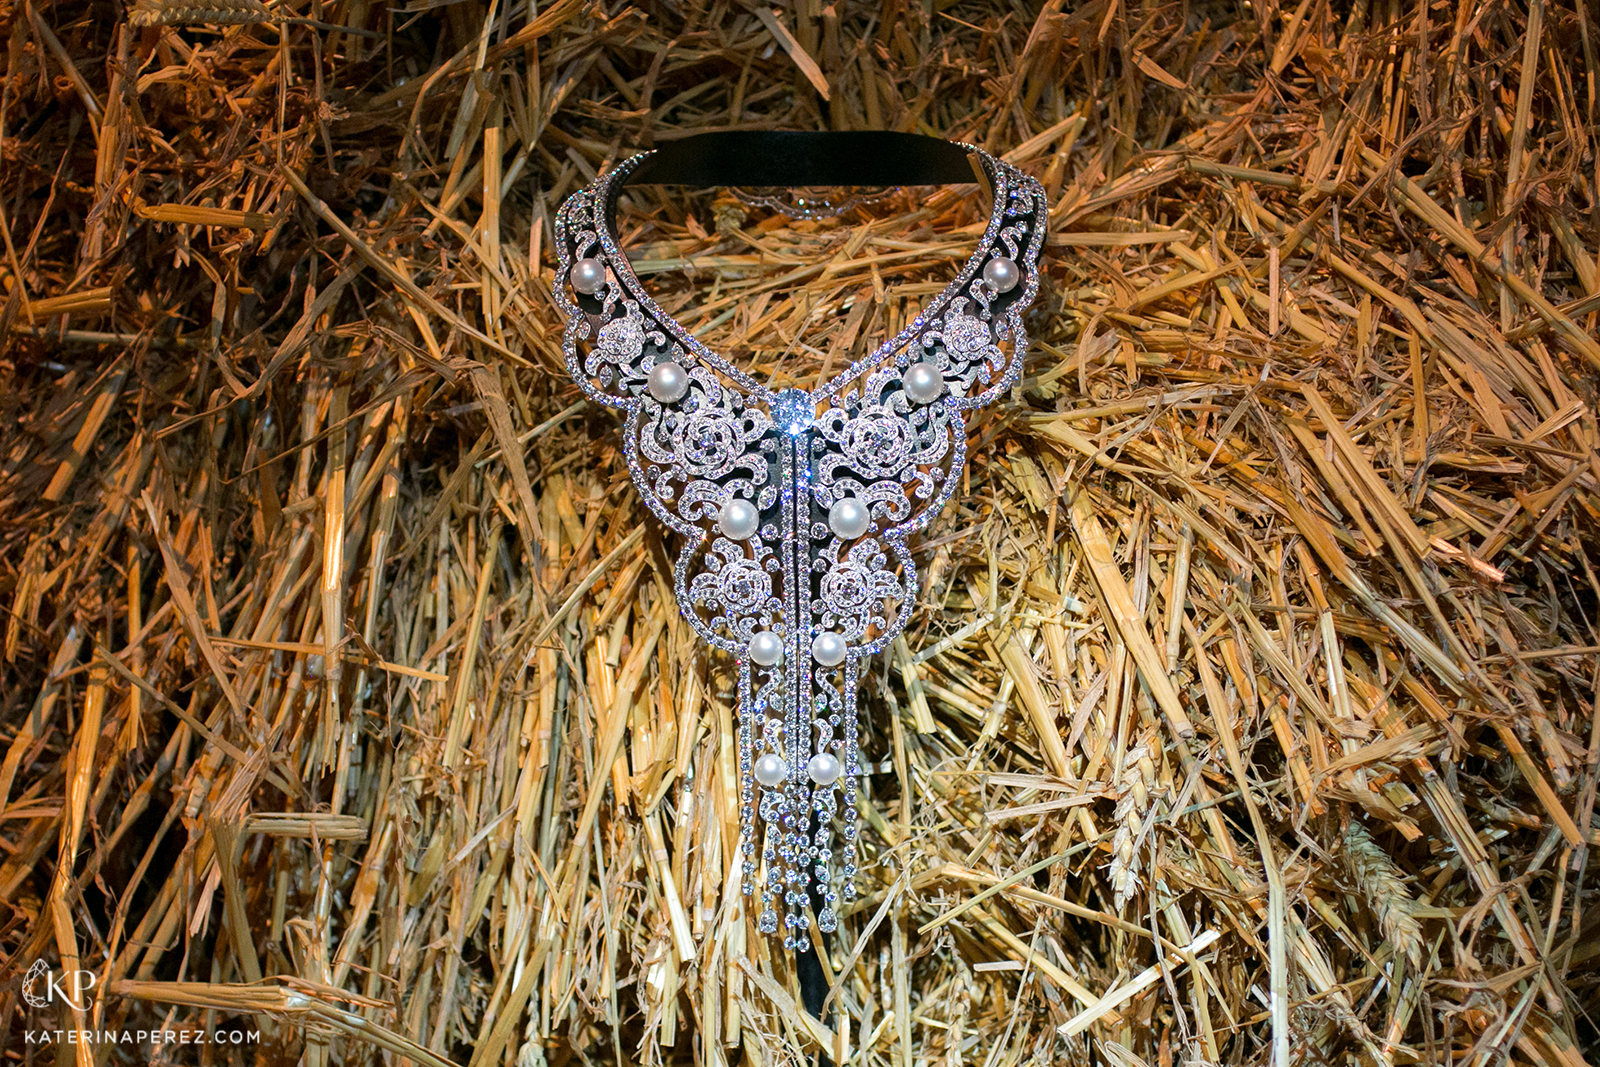 Chanel 'Le Paris Russe de Chanel' collection 'Sarafane' necklace with diamonds and pearls in white gold